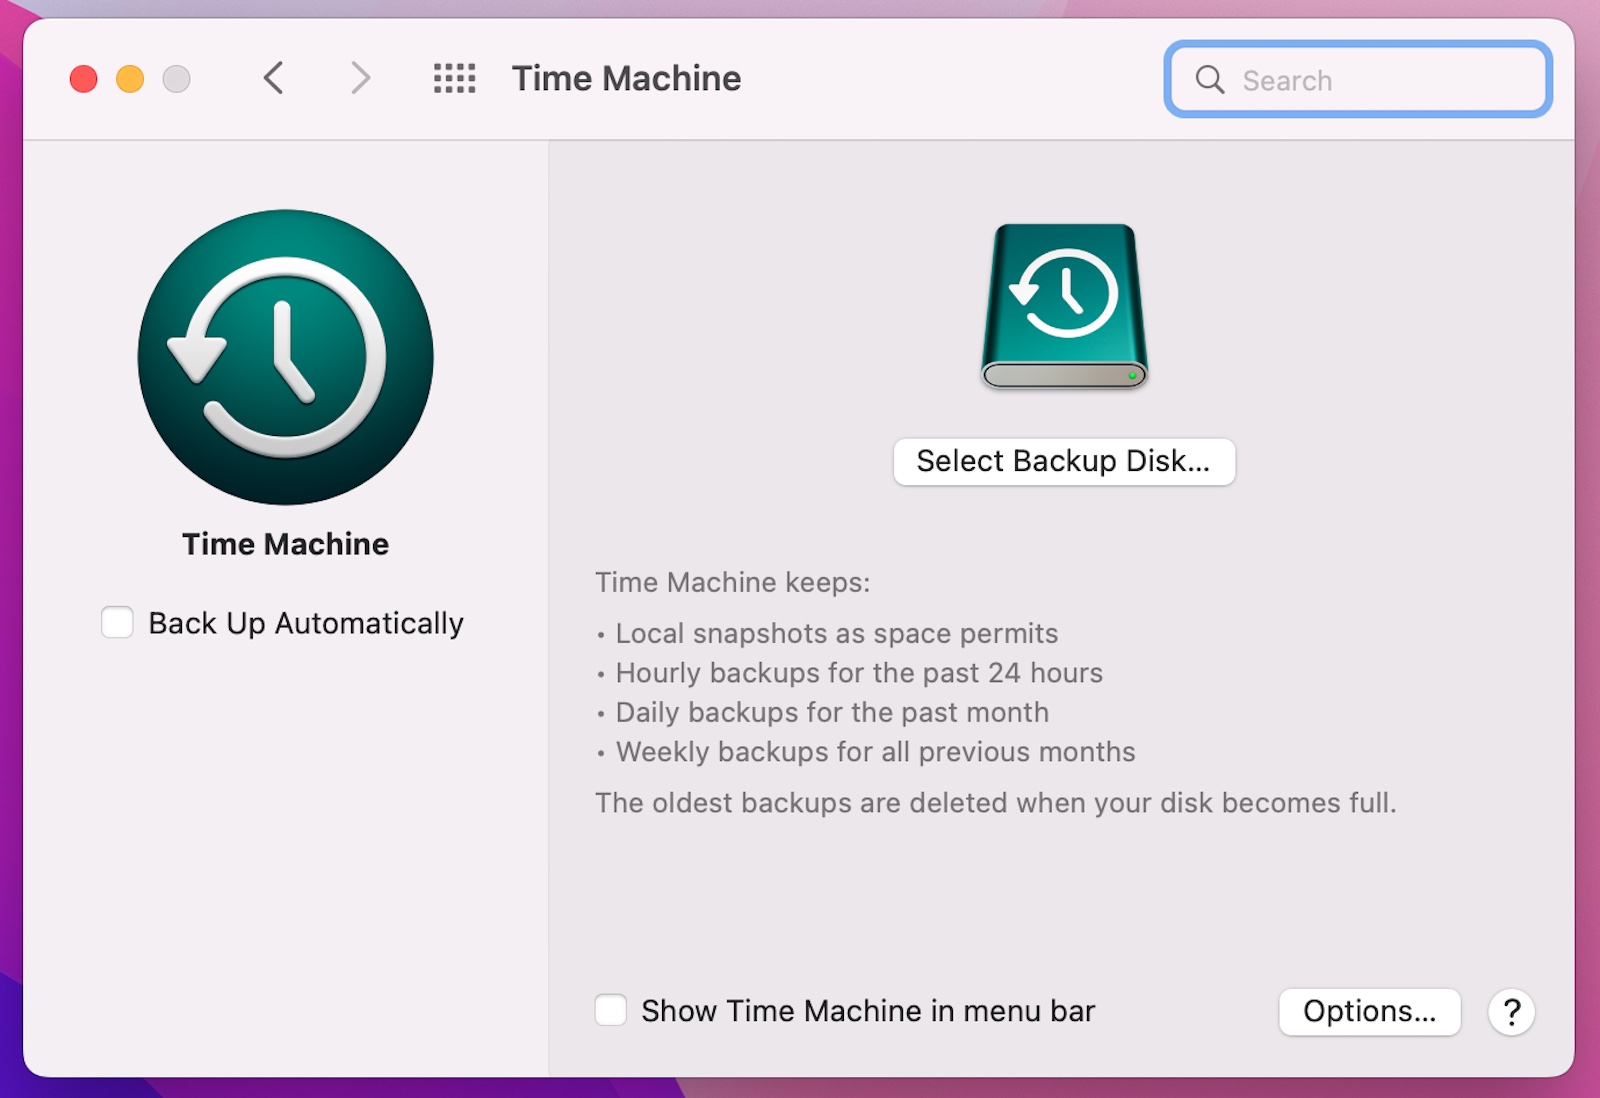 Time Machine will back up files on all your drives.